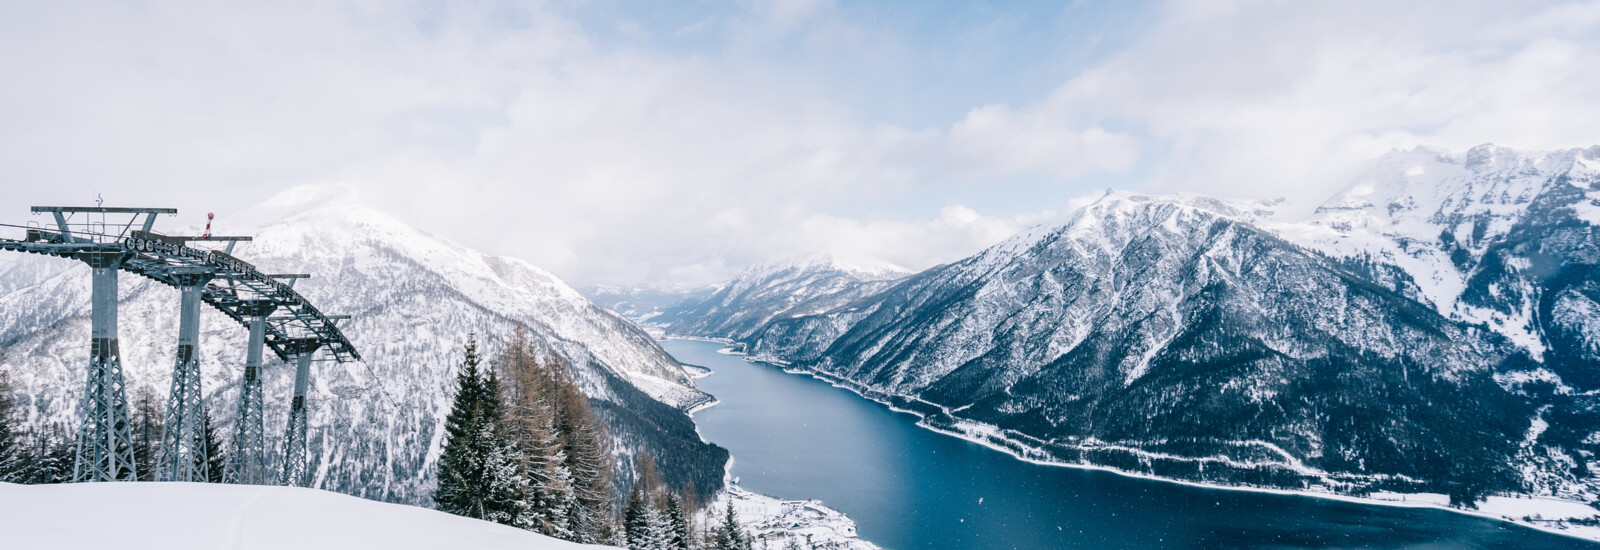 Skiing and Winter Holidays in Austria ➢ Plan Your Trip